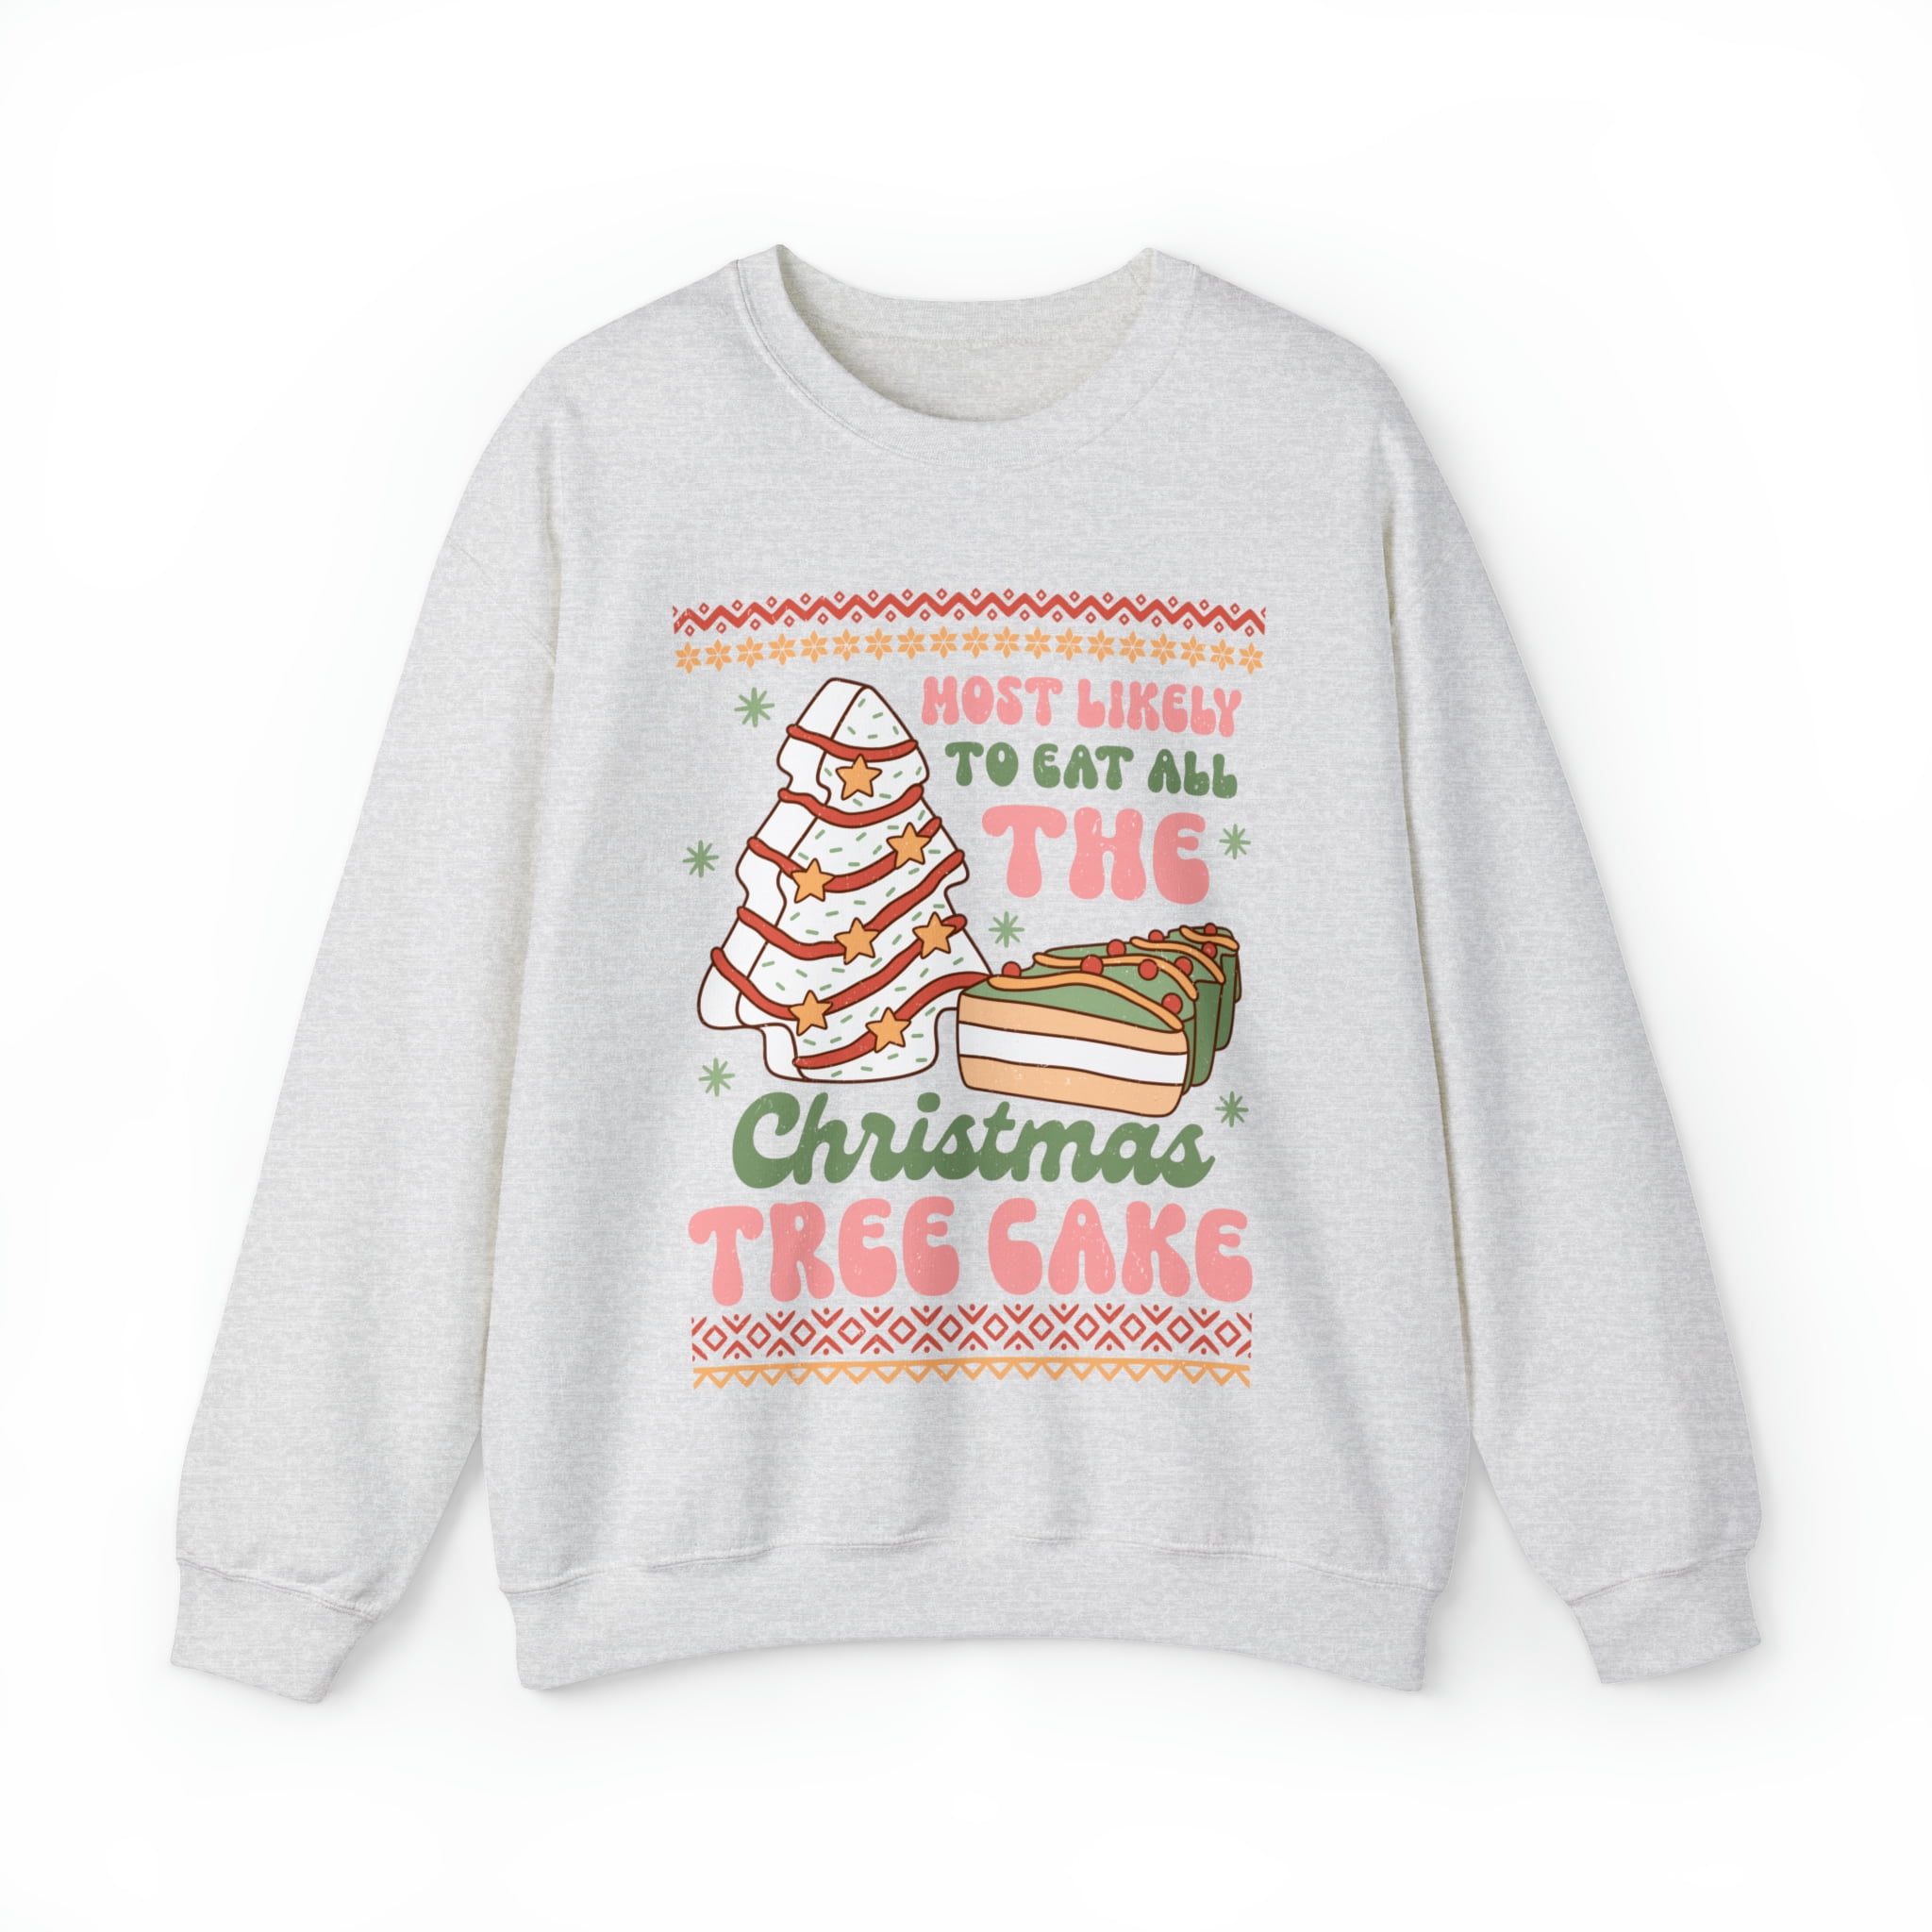 YSJZBS christmas tree cake sweatshirt,black of friday womens coats,1 cent  items only,today show deals of the day,items under 5 dollars,gifts for best